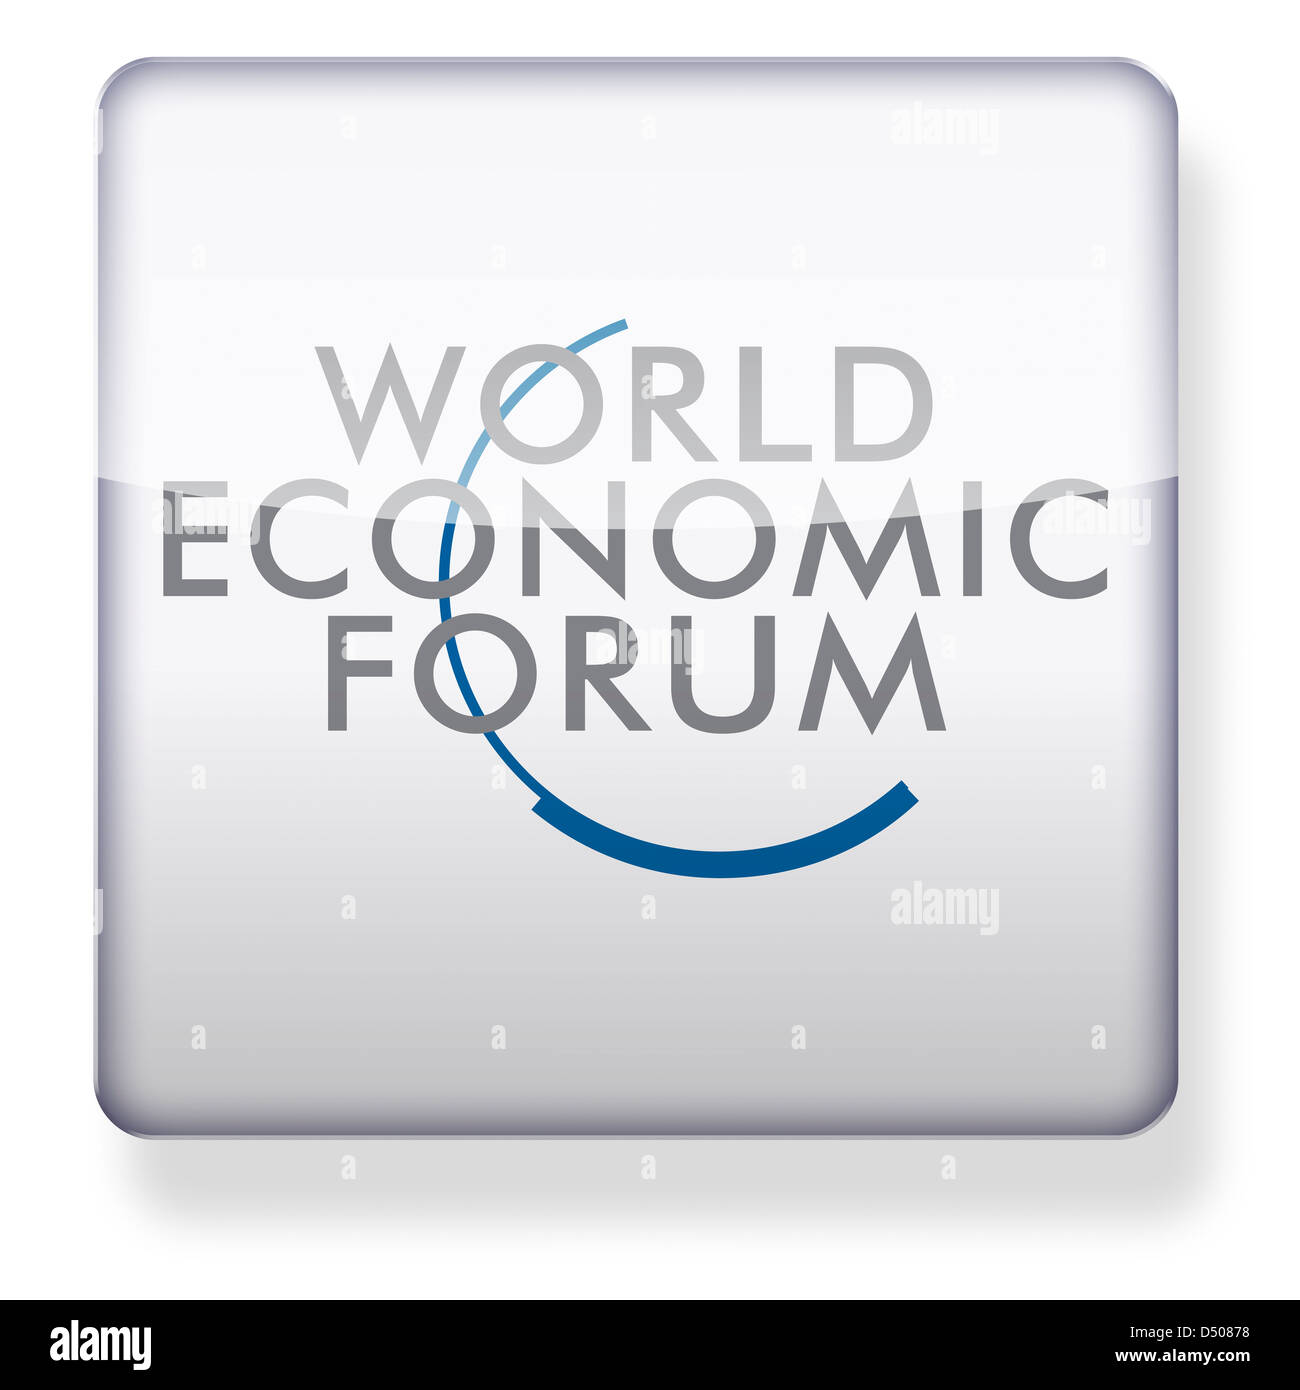 World Economic Forum as an app icon. Clipping path included. Stock Photo